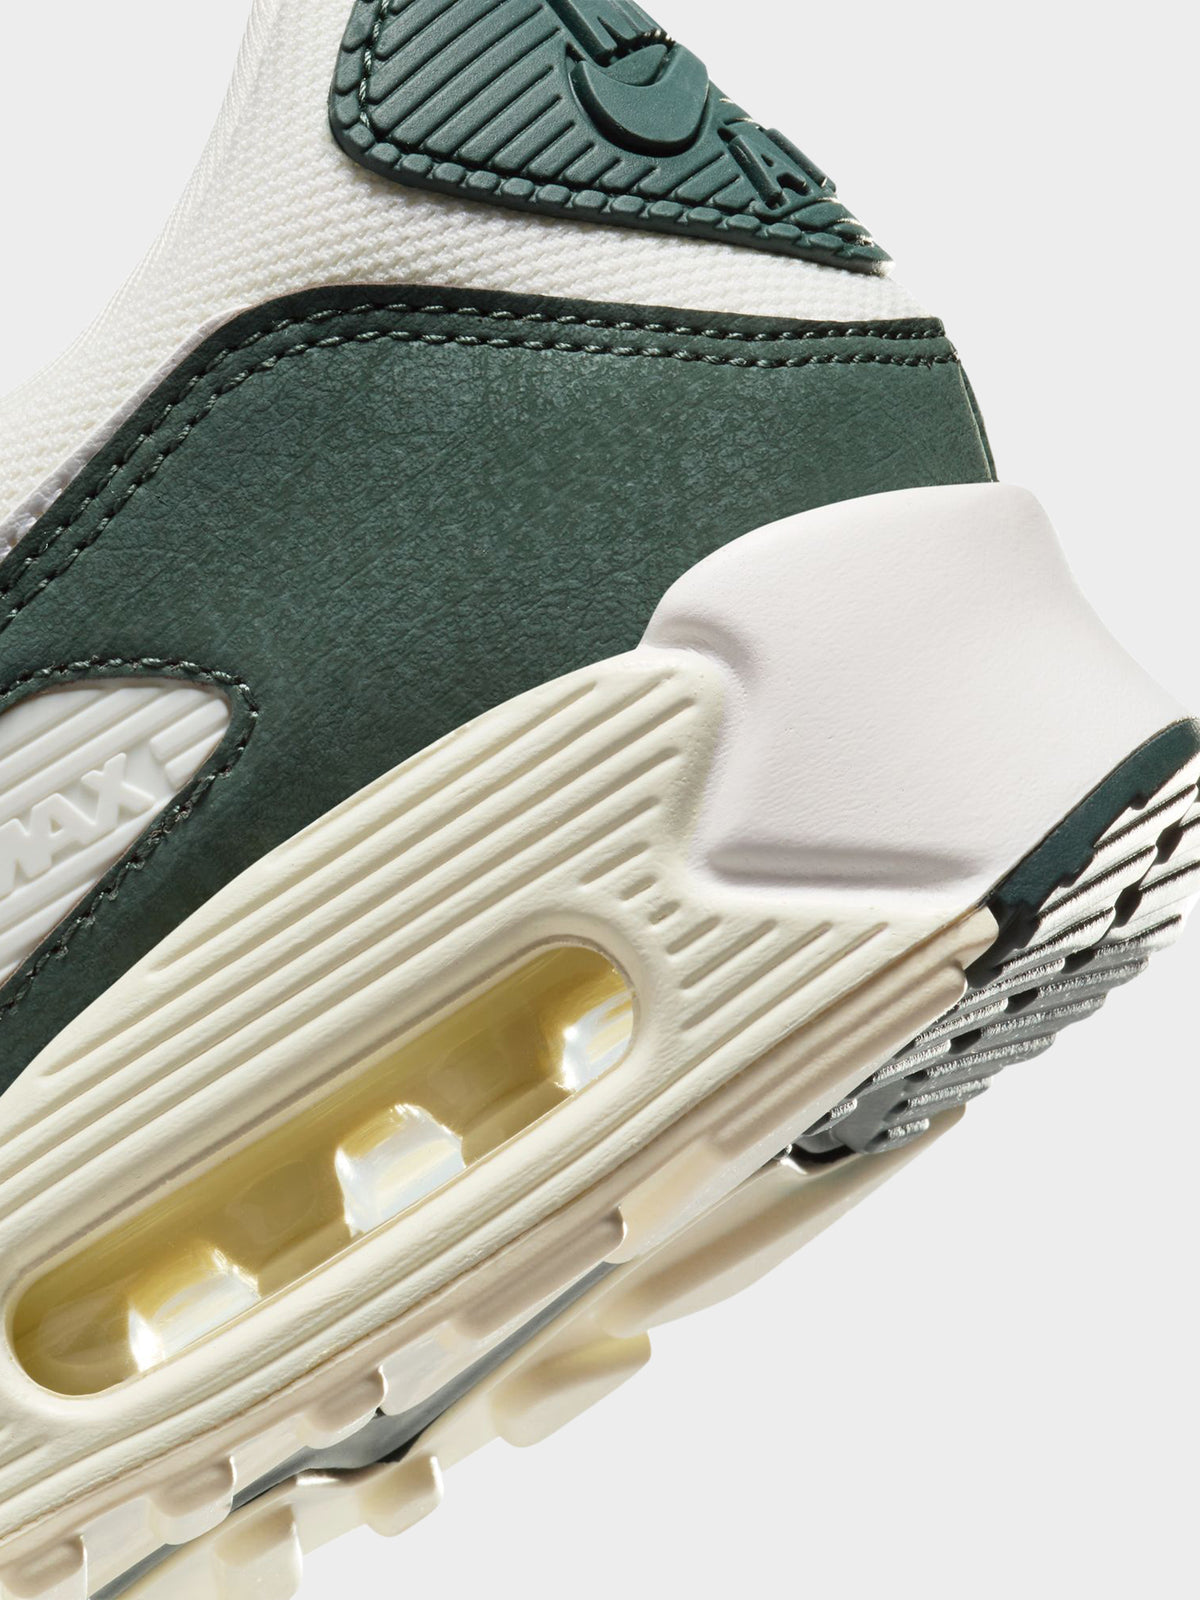 Womens Air Max 90 Sneakers in Sail, White, Green &amp; Coconut Milk